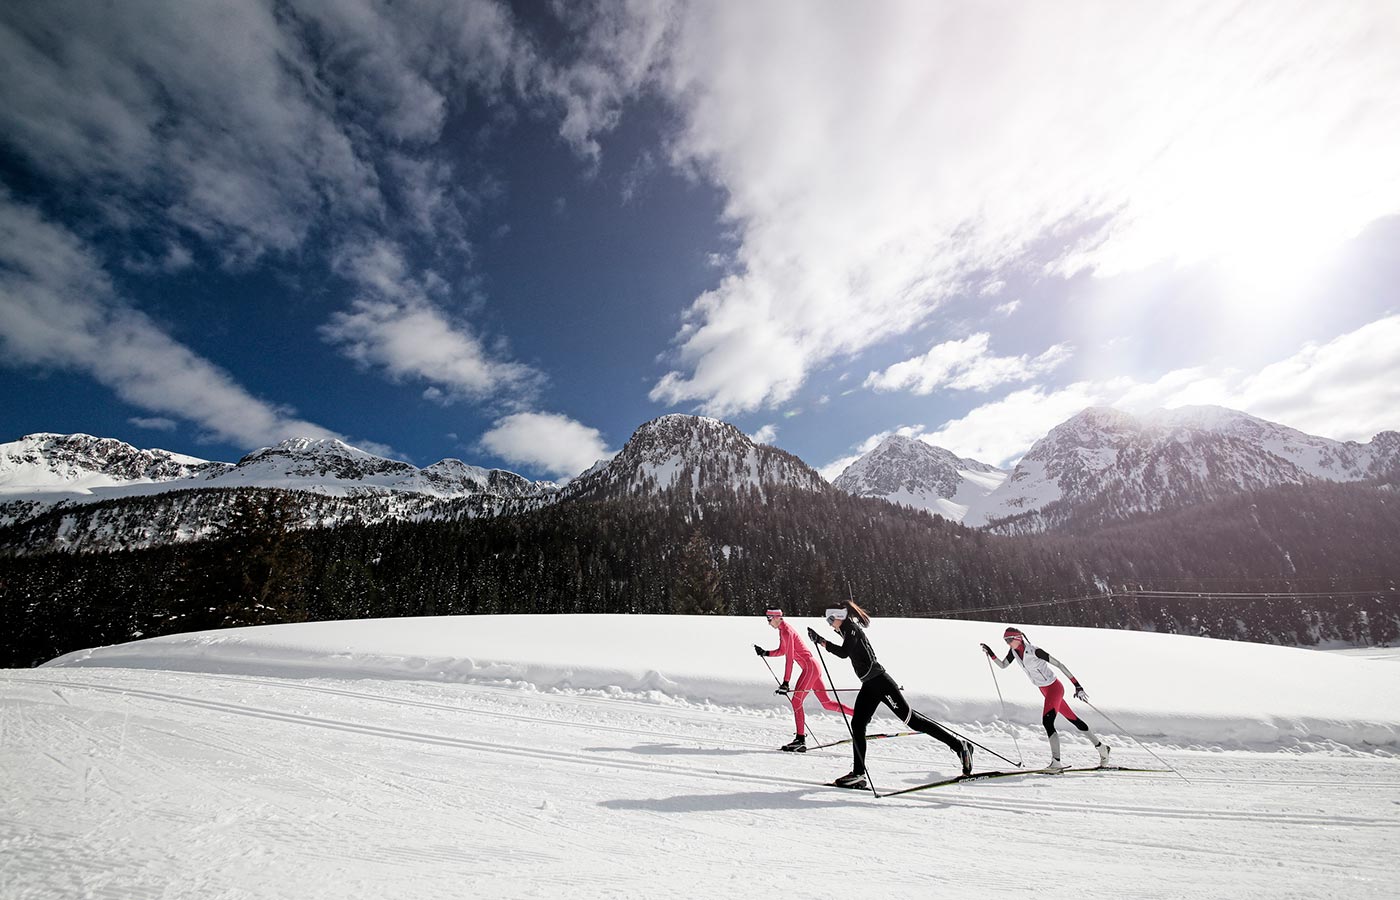 Skiers spend a day moena in winter